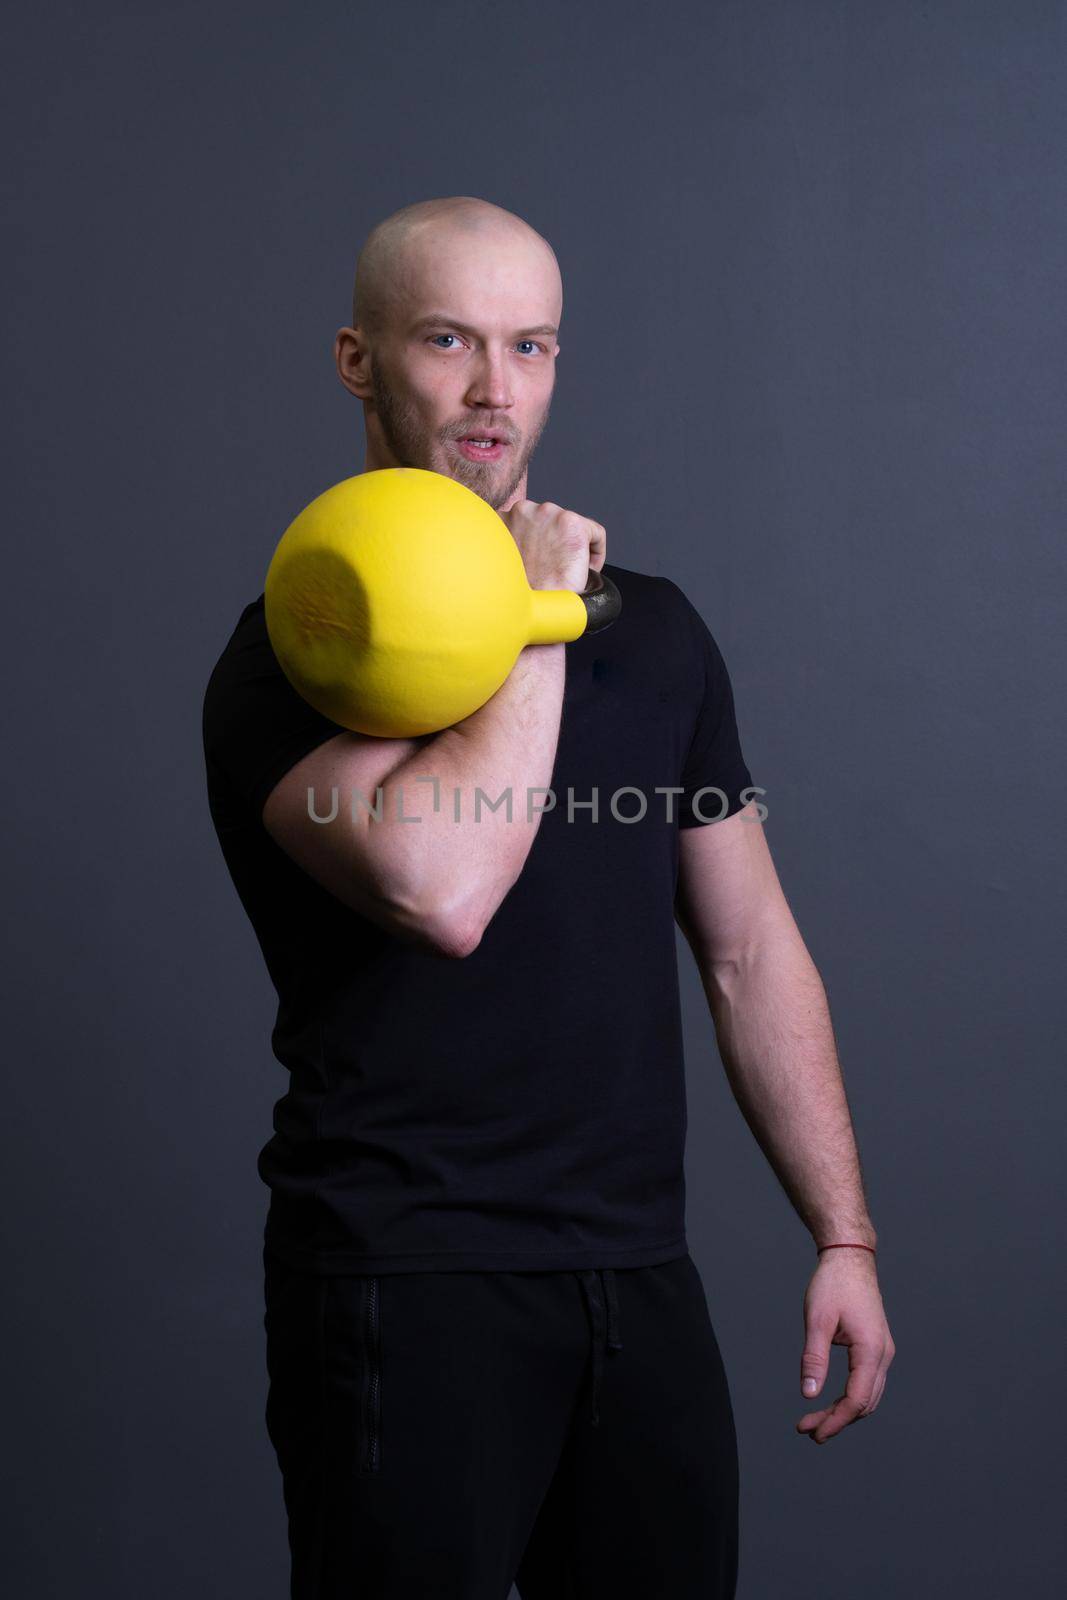 Guy with a yellow kettlebell gym anonymous yellow strength, from motivation teenager for strong and resitance sportswear, vietnamese filipino. Healthy bent health, club hiit